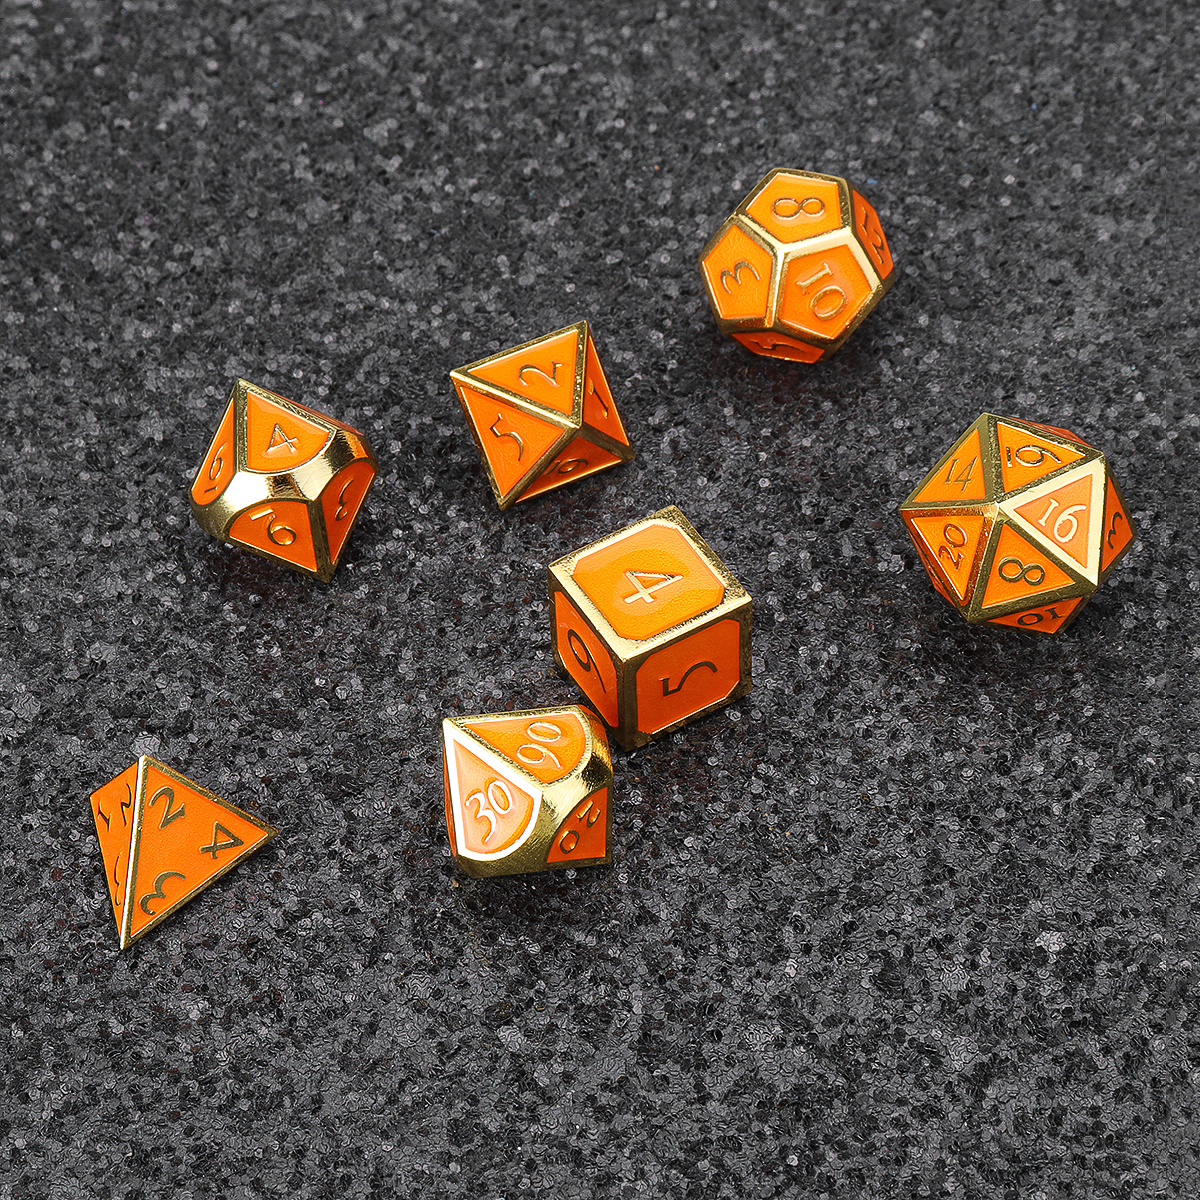 Solid-Metal-Heavy-Dice-Set-Polyhedral-Dices-Role-Playing-Games-Dice-Gadget-RPG-1391317-2